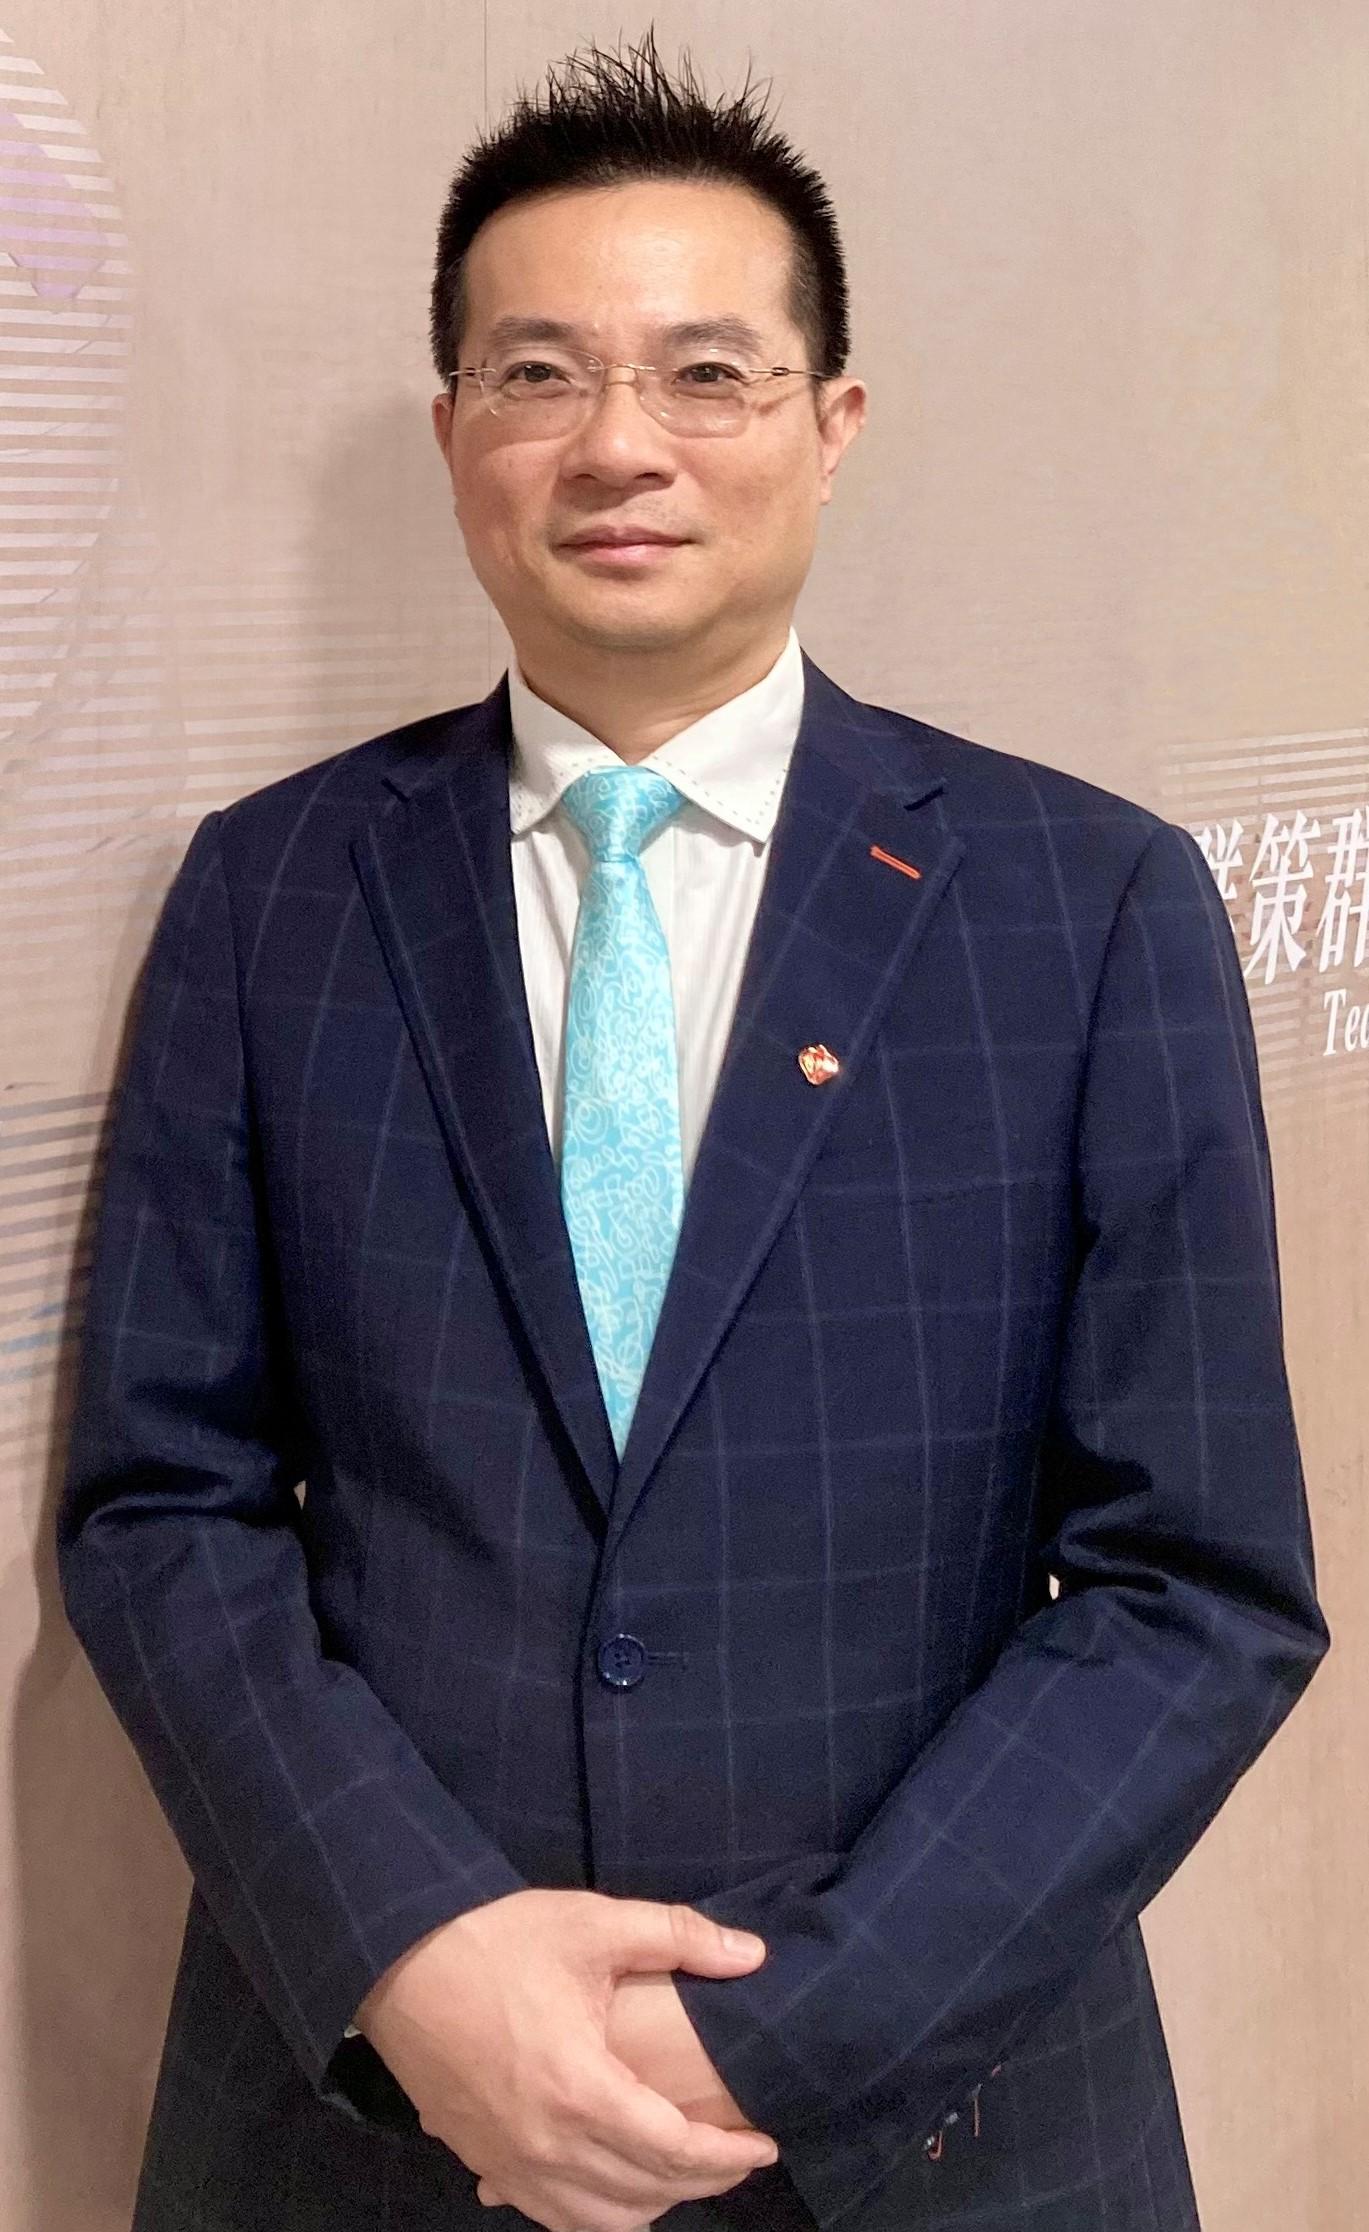 The Hospital Authority announced today (June 29) that Dr Frank Chan will be appointed as the Hospital Chief Executive of Hong Kong Buddhist Hospital, Our Lady of Maryknoll Hospital and Tung Wah Group of Hospitals Wong Tai Sin Hospital with effect from September 1.